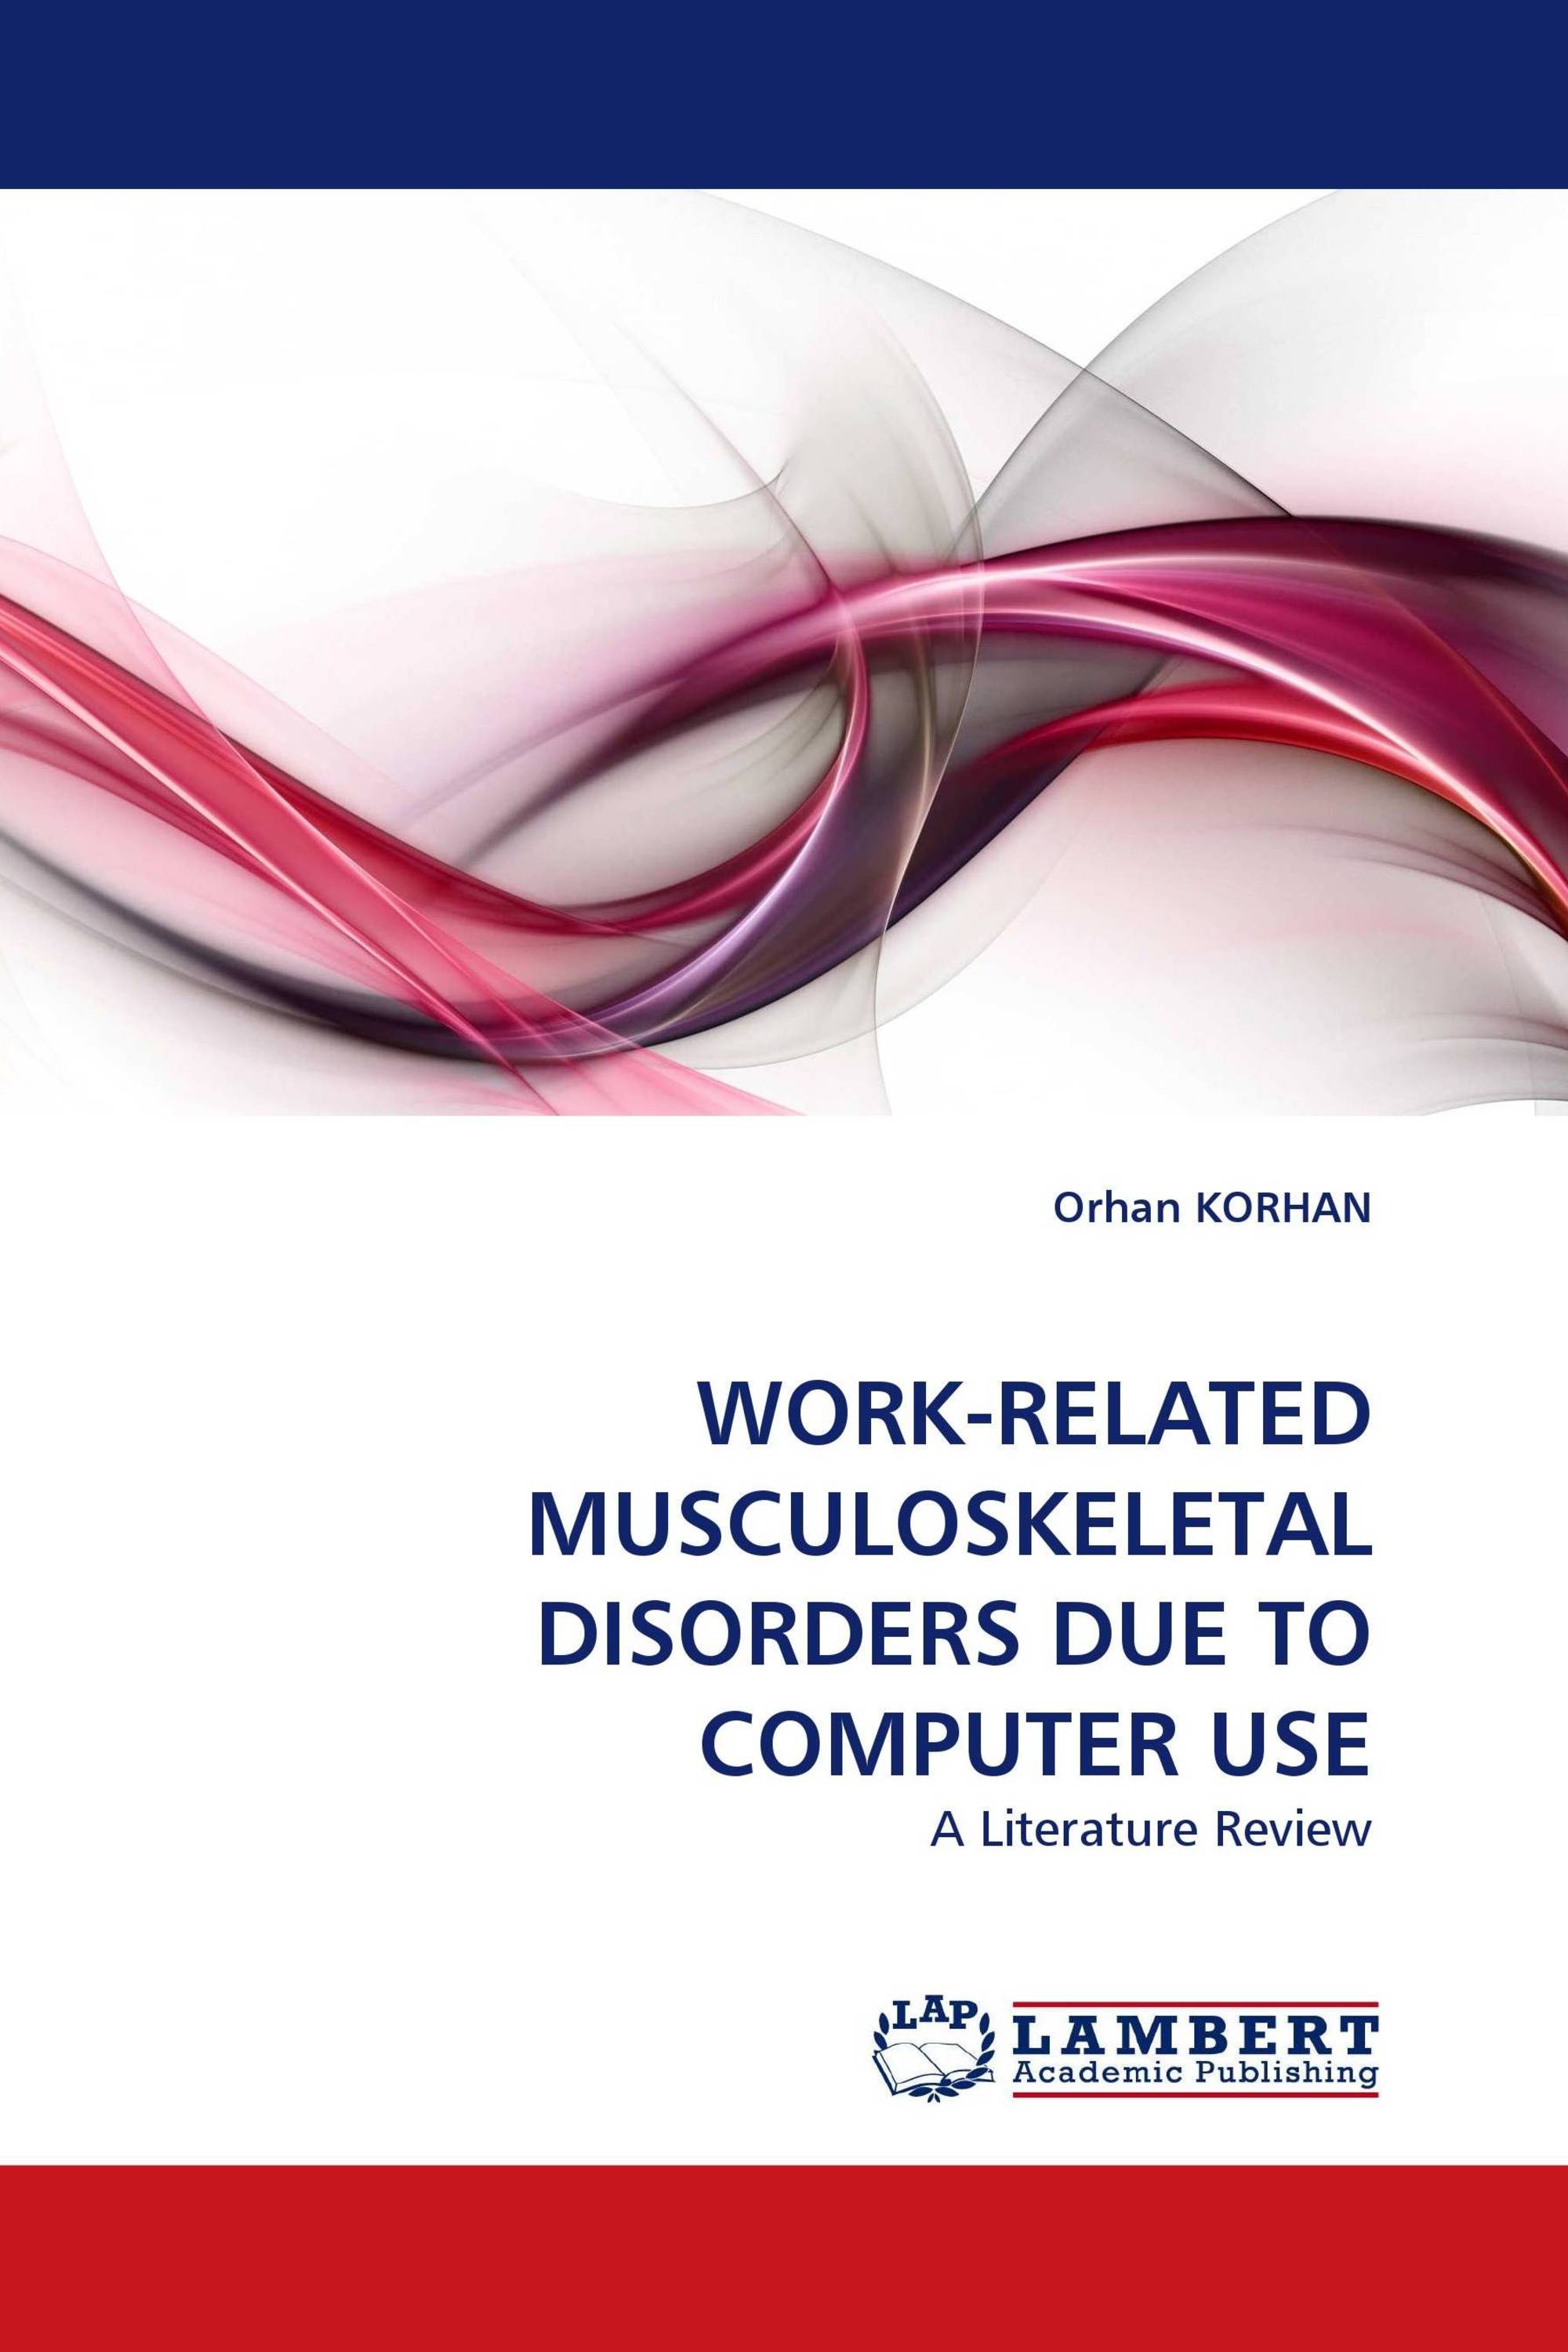 WORK-RELATED MUSCULOSKELETAL DISORDERS DUE TO COMPUTER USE